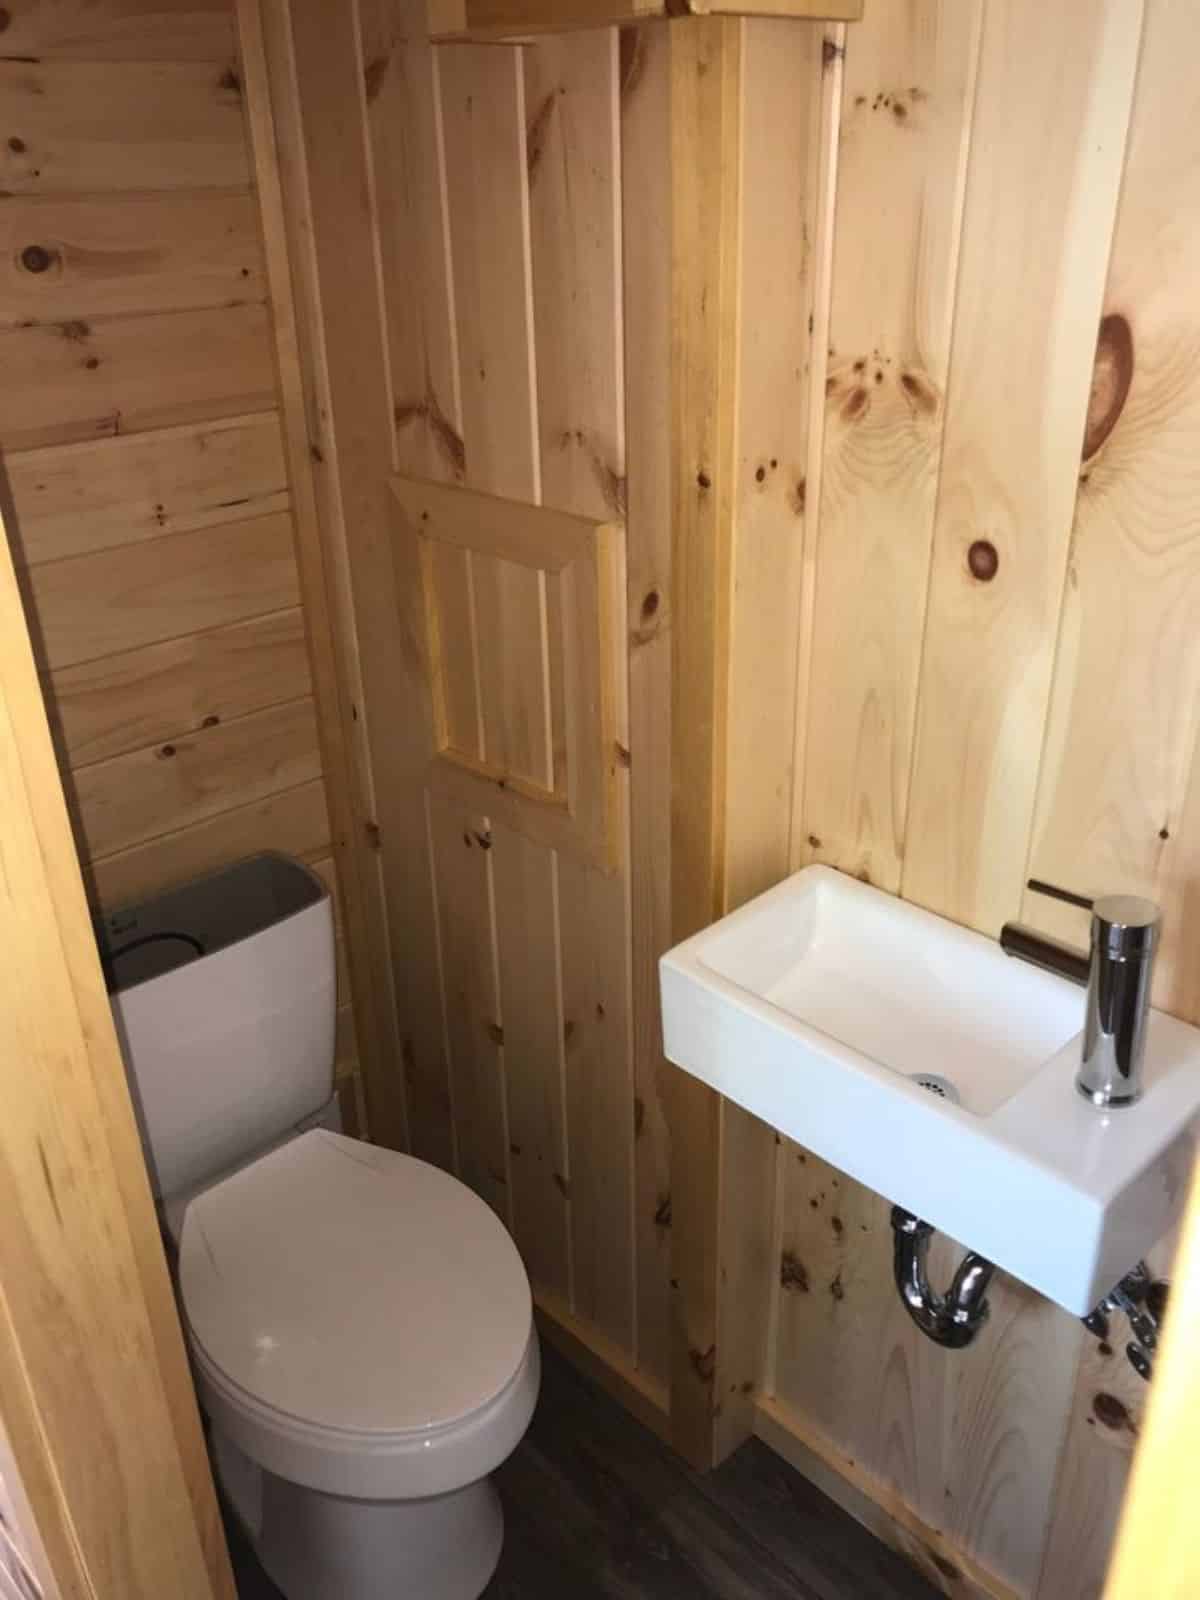 bathroom of two bedroom tiny home has all the standard fittings